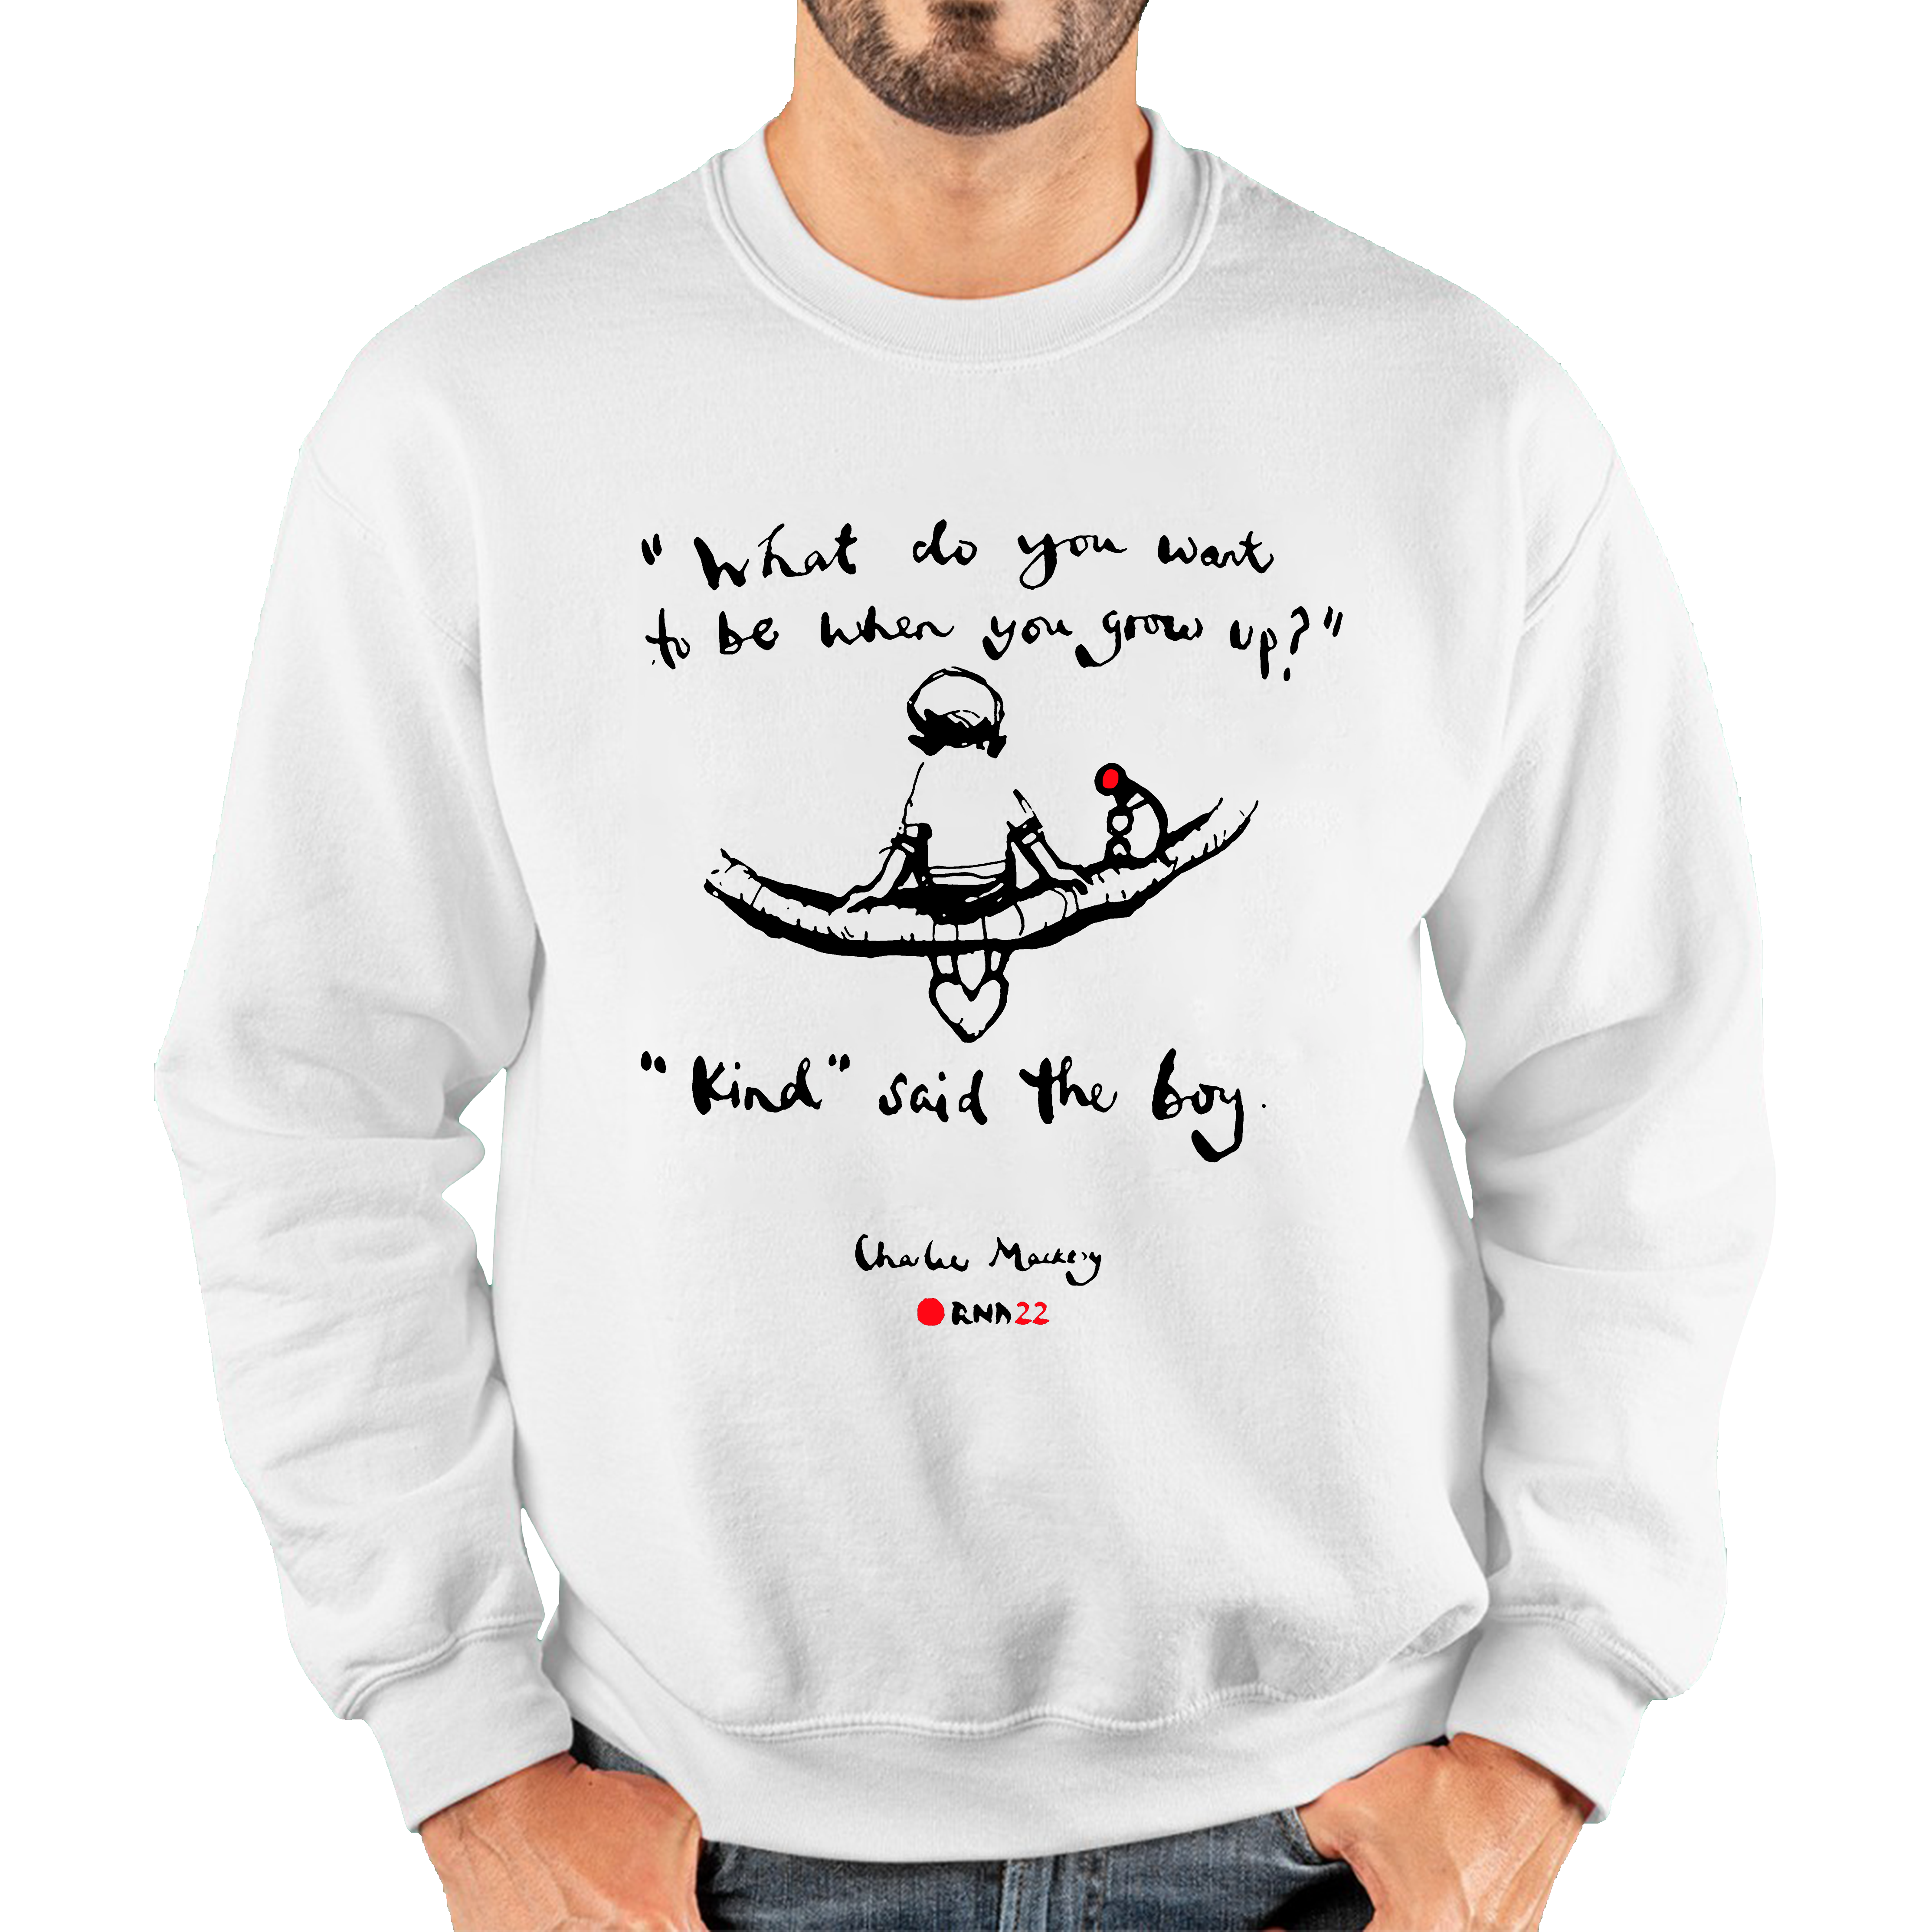 What Do You Want To Be When You Grow Up Kind Said The Boy Charlie Macksey Red Nose Day Adult Sweatshirt. 50% Goes To Charity